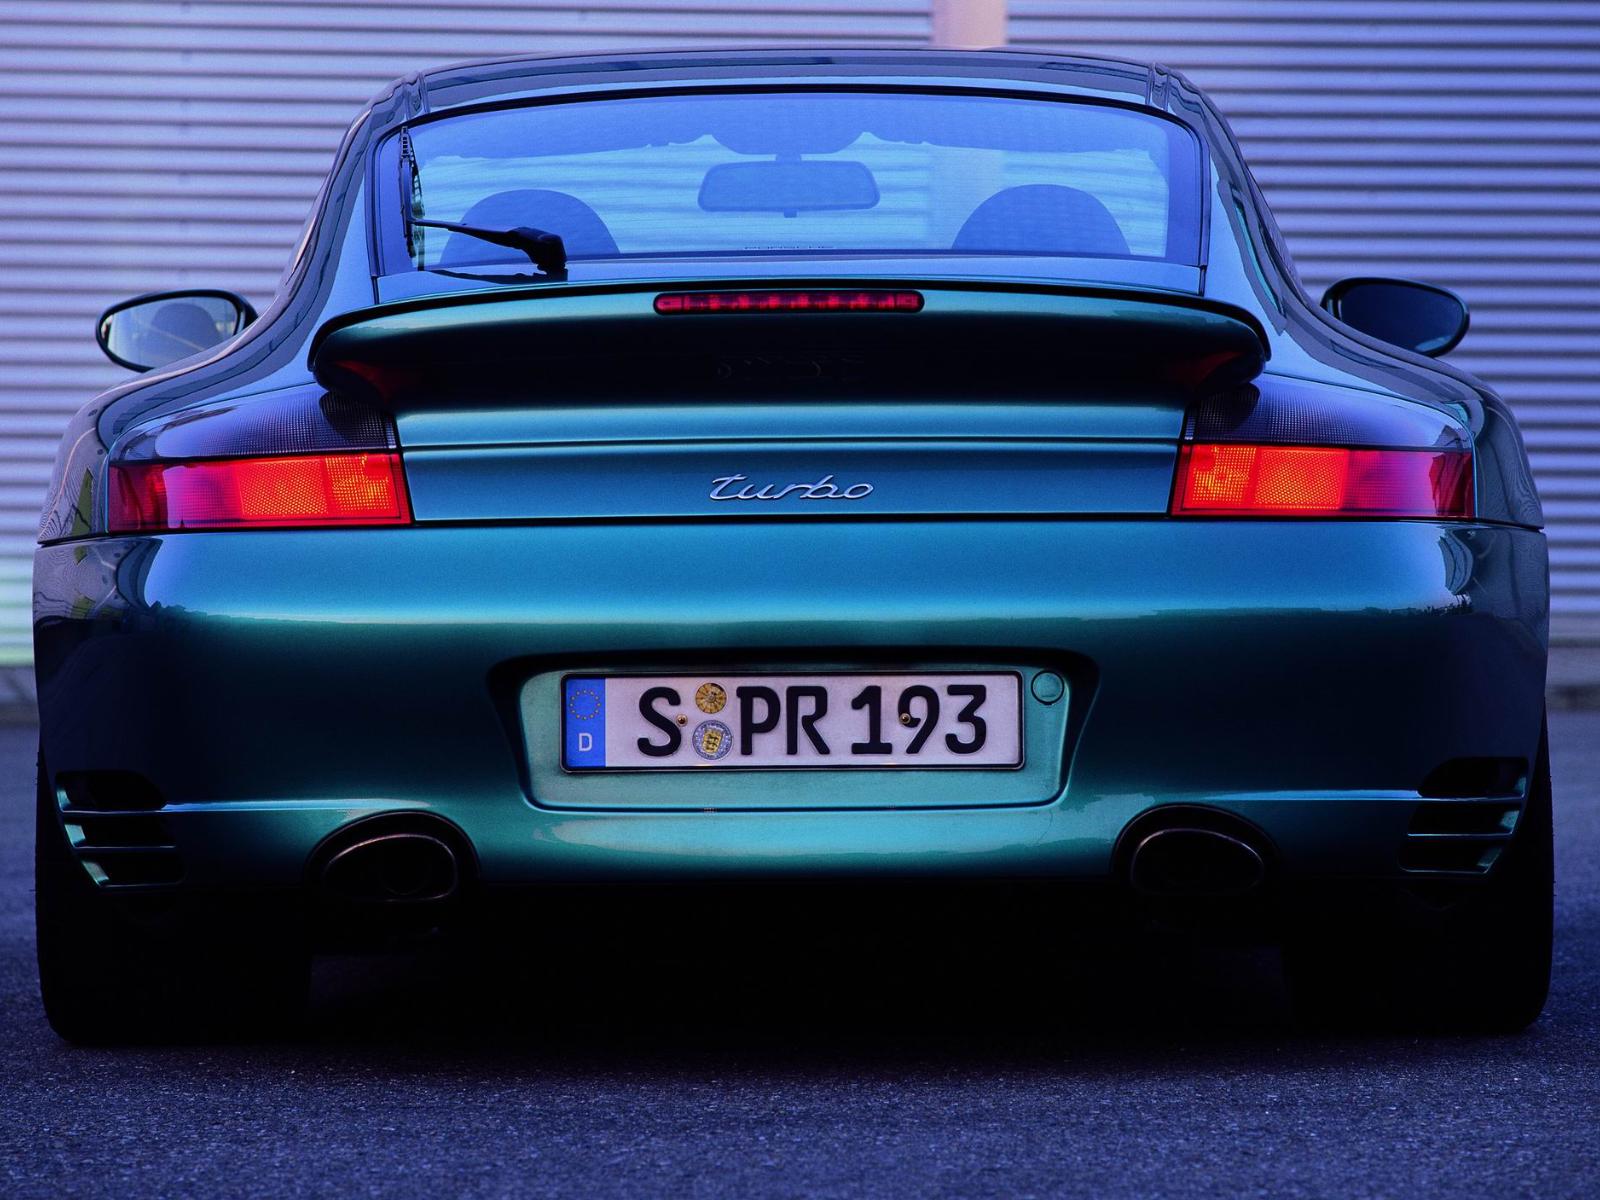 Porsche 996 911 Turbo Cars Wallpapers | Car Pictures | Cars Wallpaper